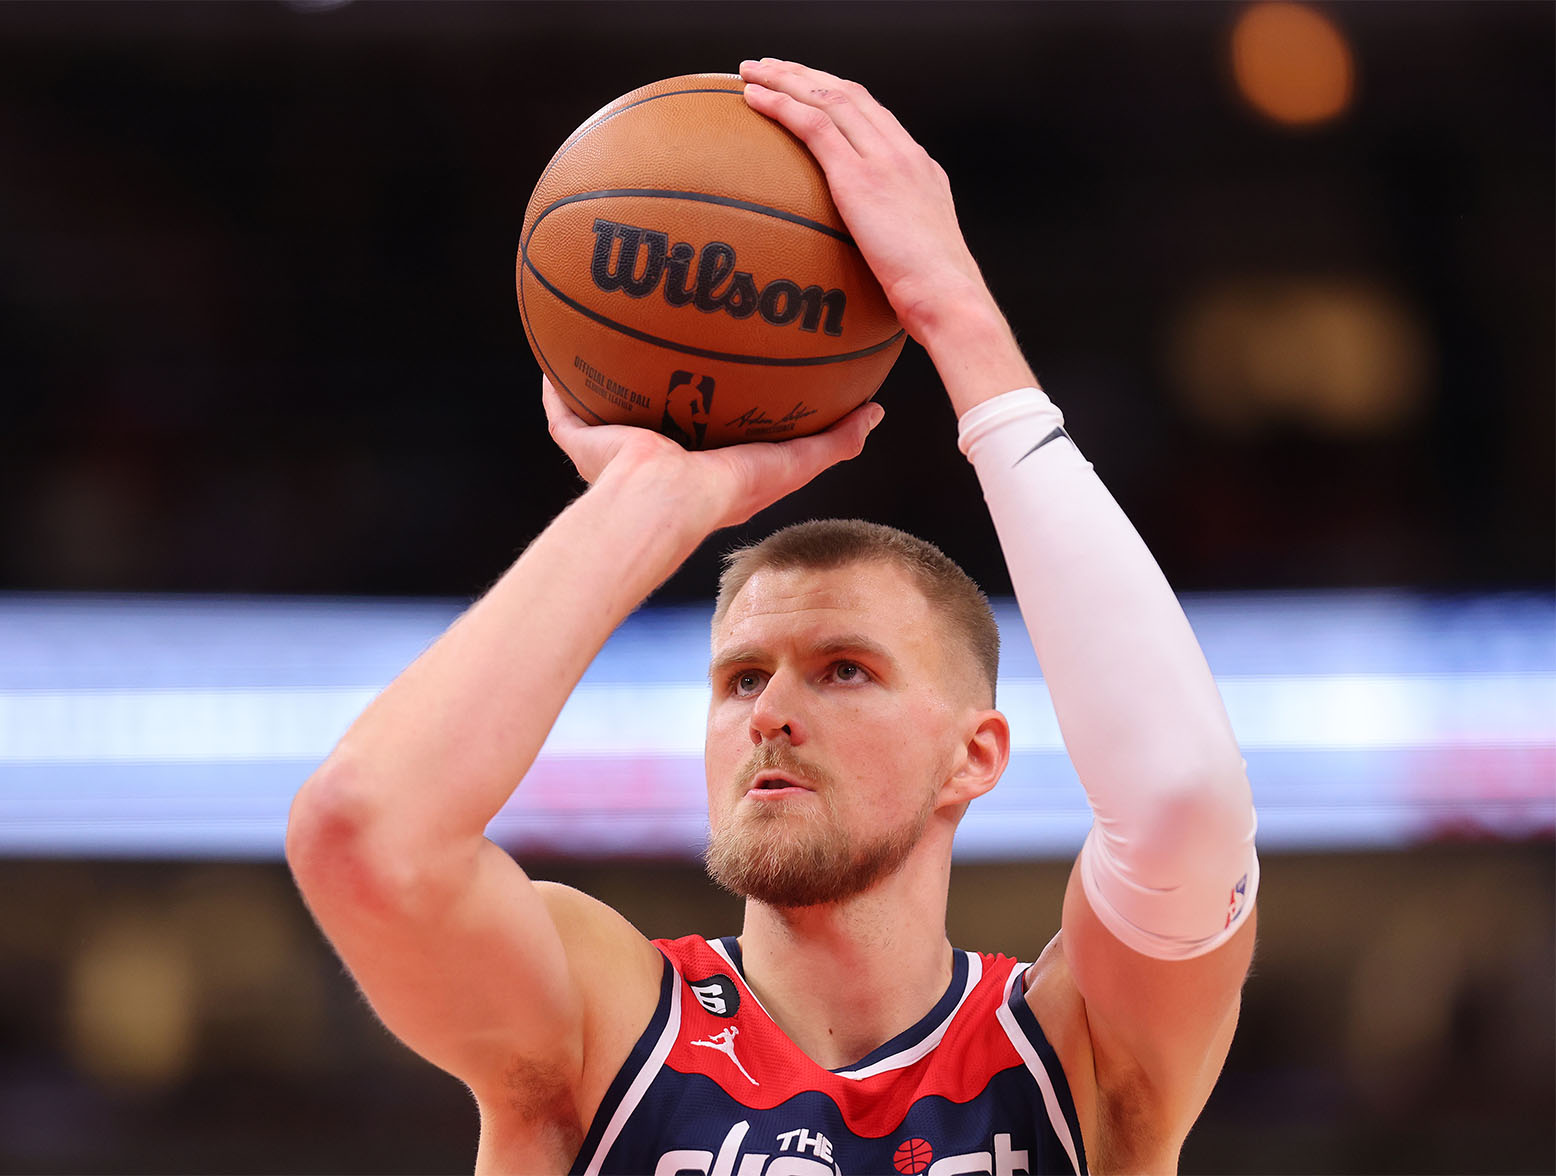 CHICAGO, ILLINOIS - DECEMBER 07: Kristaps Porzingis #6 of the Washington Wizards shoots a free throw against the Chicago Bulls during the second half at United Center on December 07, 2022 in Chicago, Illinois. NOTE TO USER: User expressly acknowledges and agrees that, by downloading and or using this photograph, User is consenting to the terms and conditions of the Getty Images License Agreement. (Photo by Michael Reaves/Getty Images)